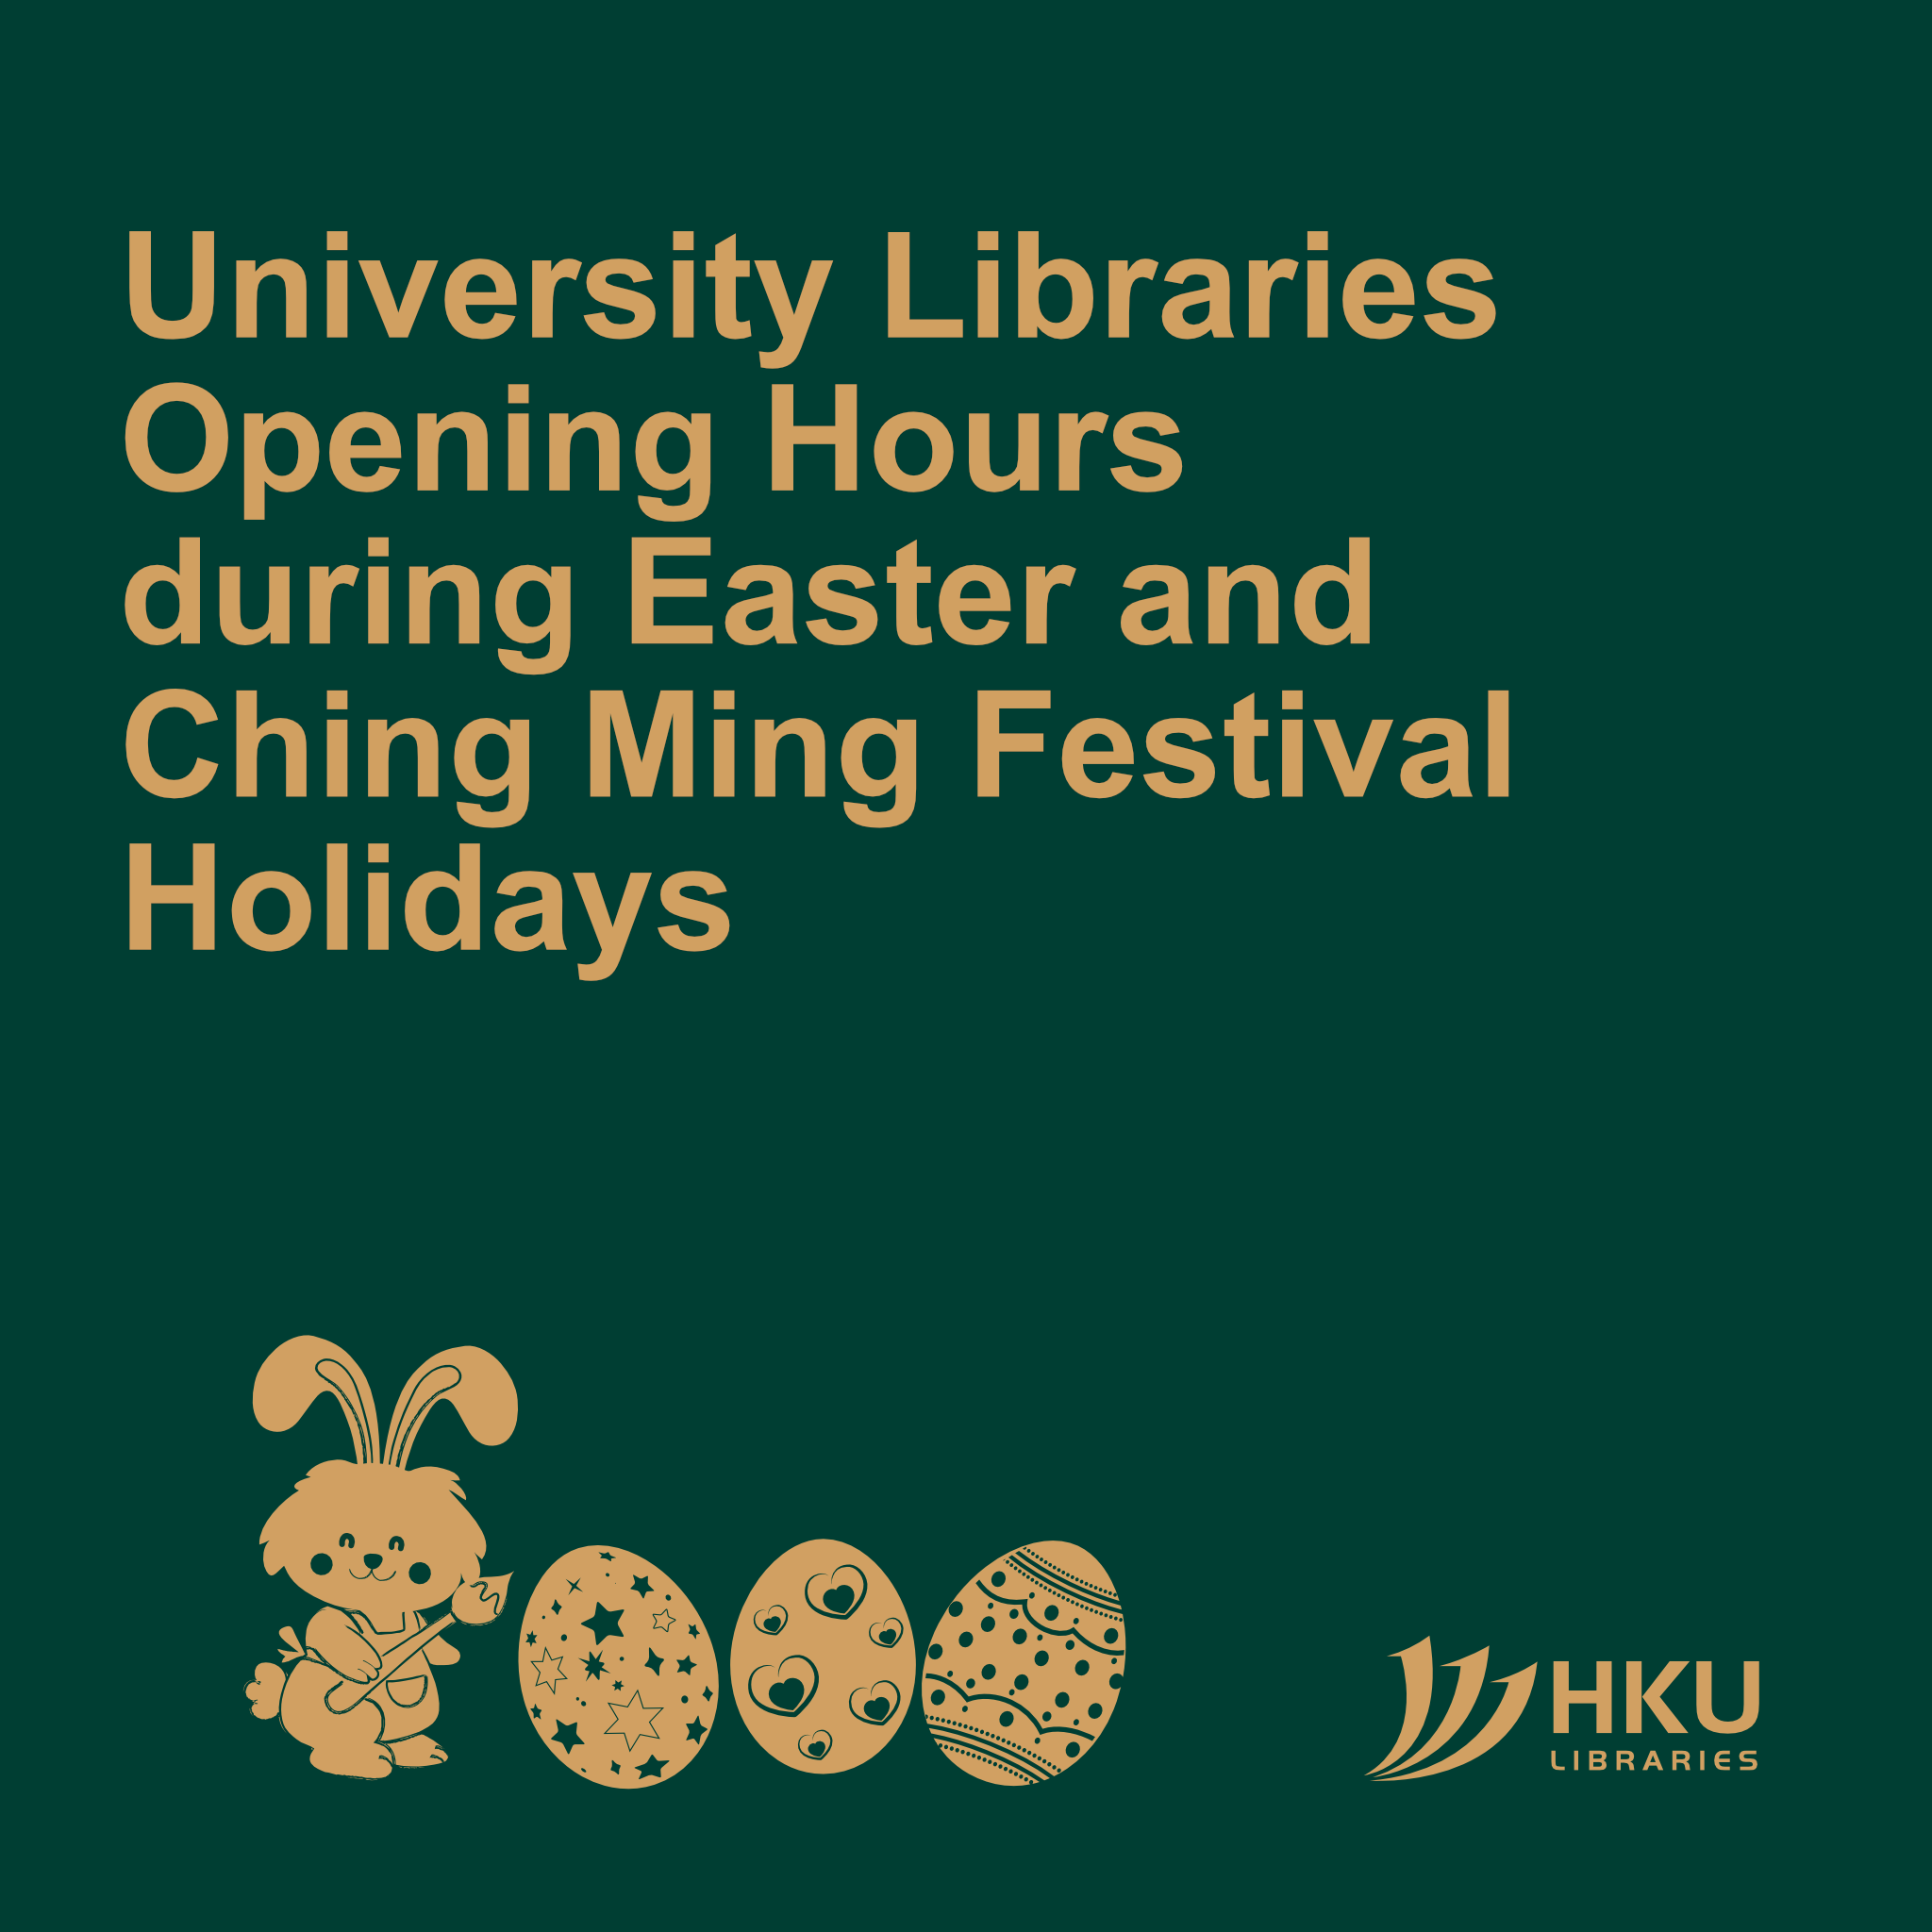 University Libraries Opening Hours during Easter and Ching Ming Festival Holidays